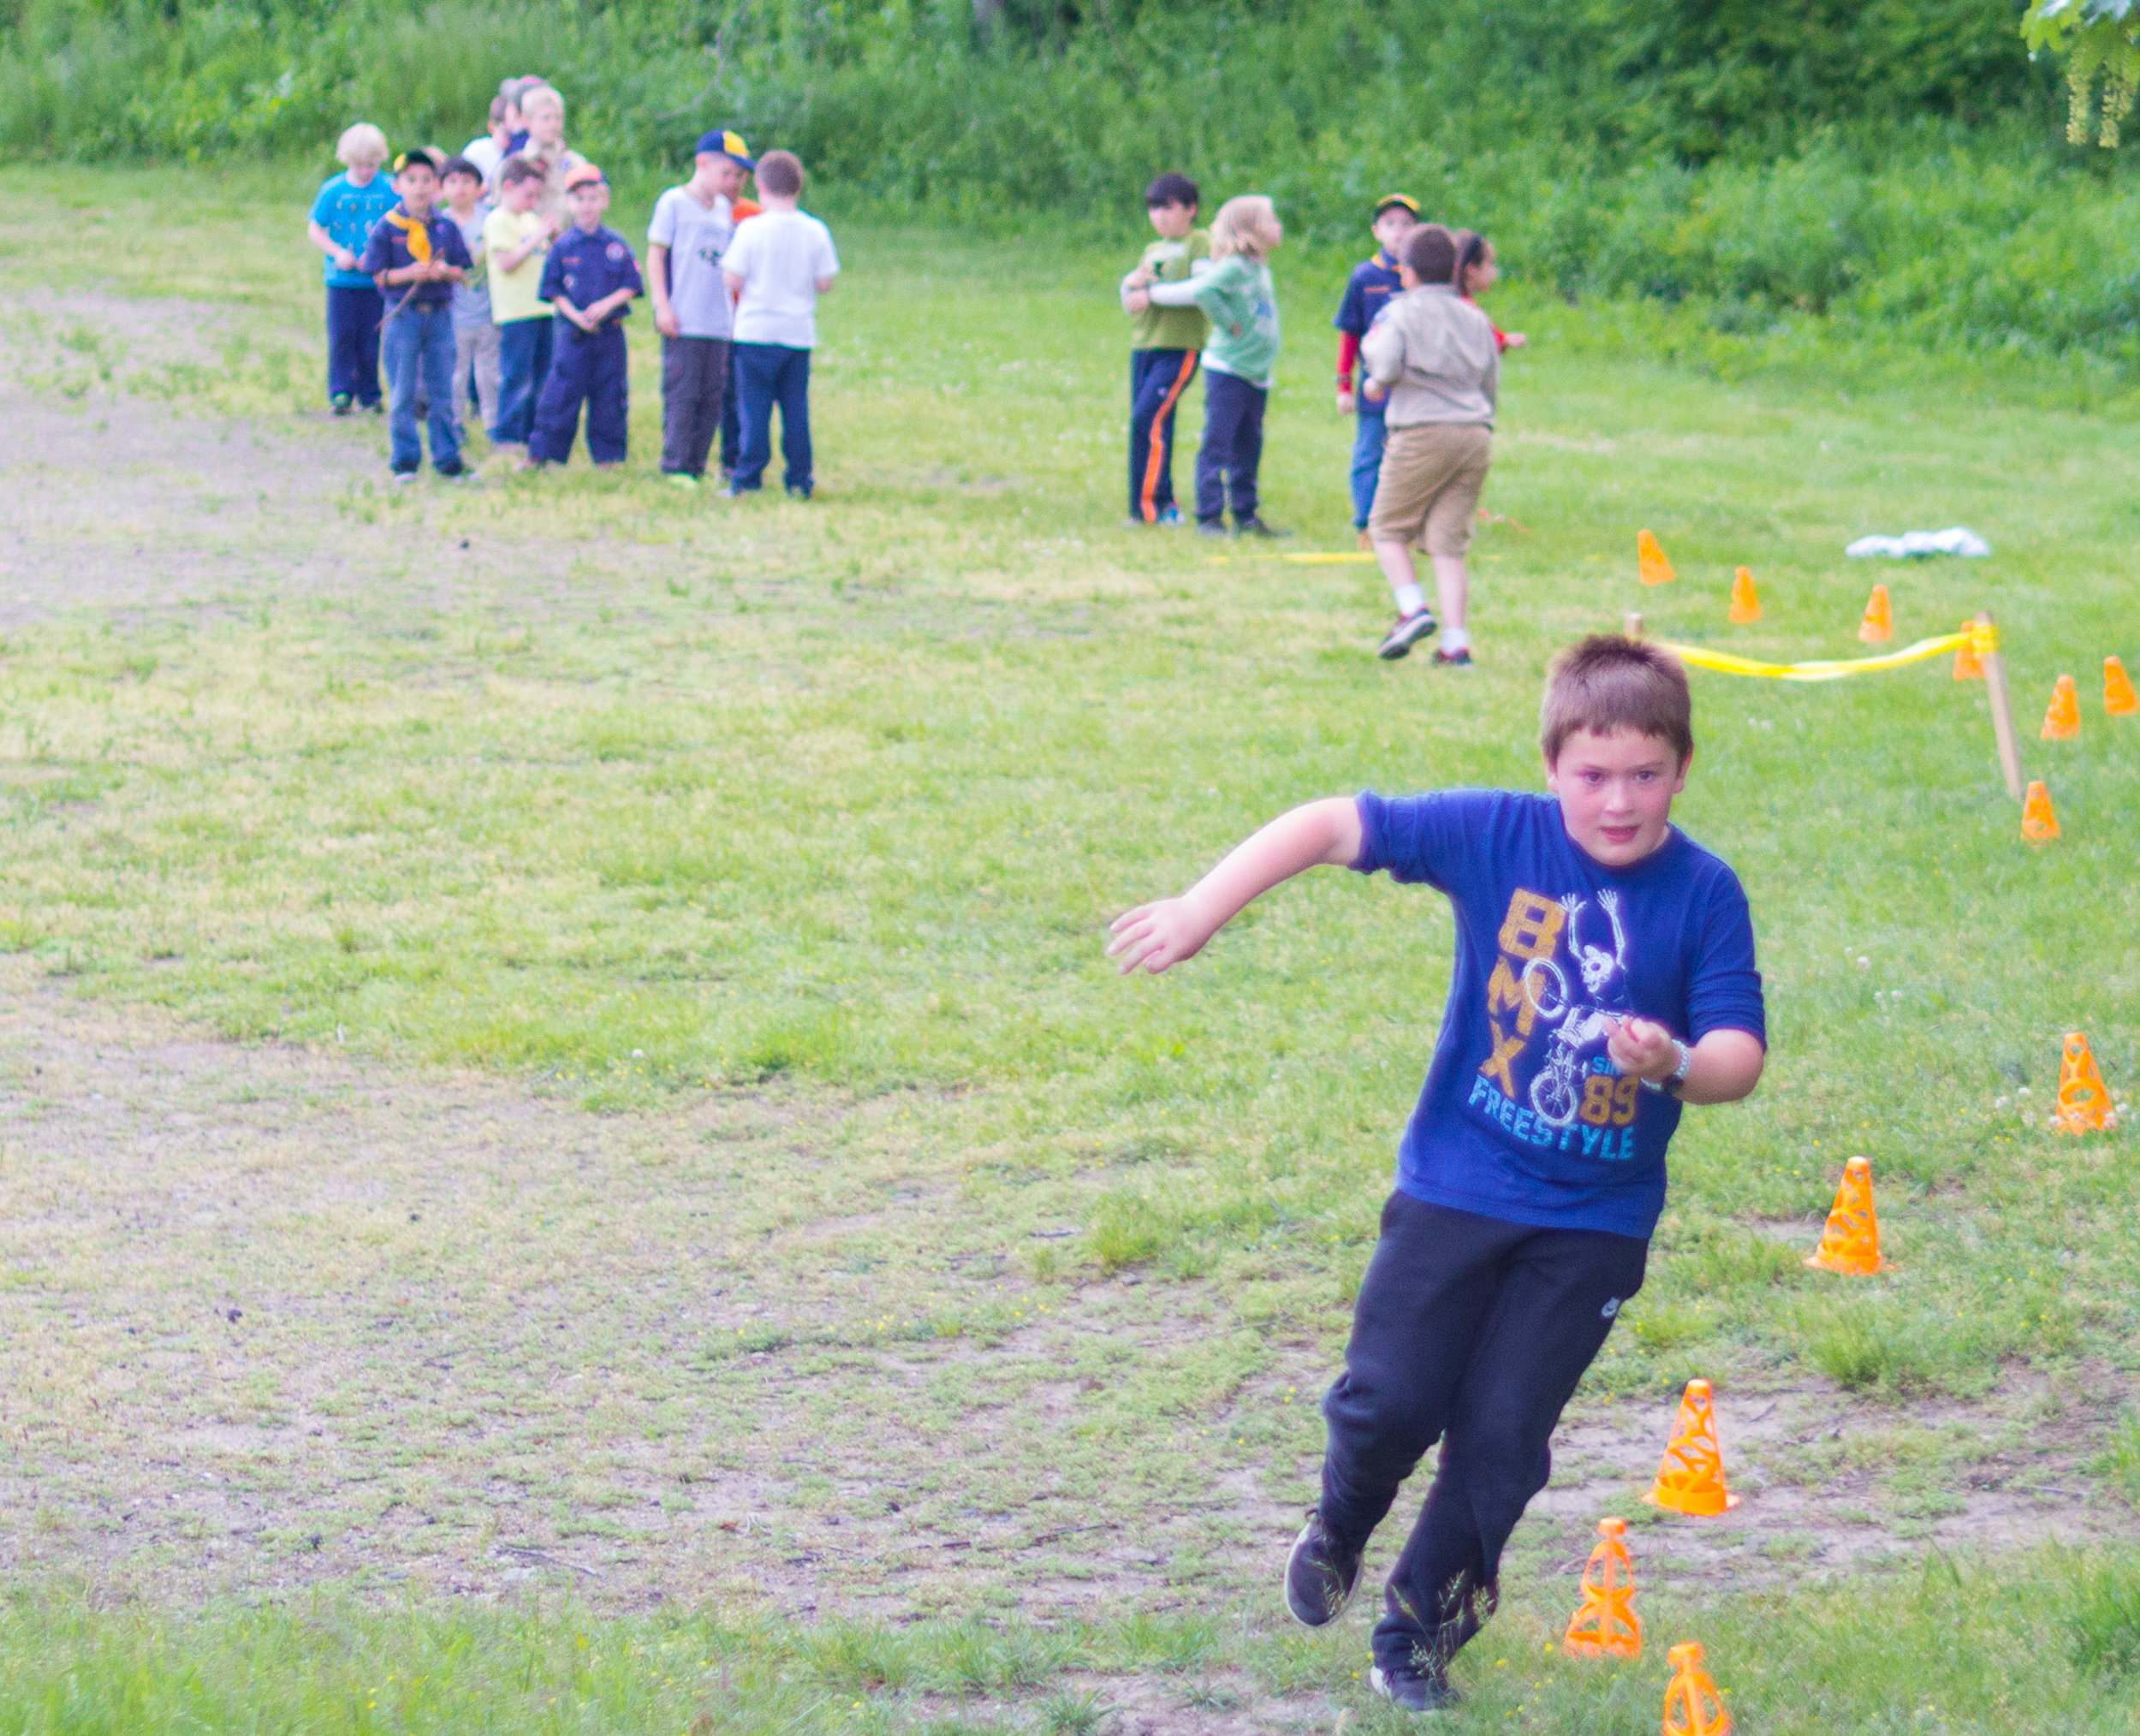 Cub Scouts Obstacle Course_05.jpg